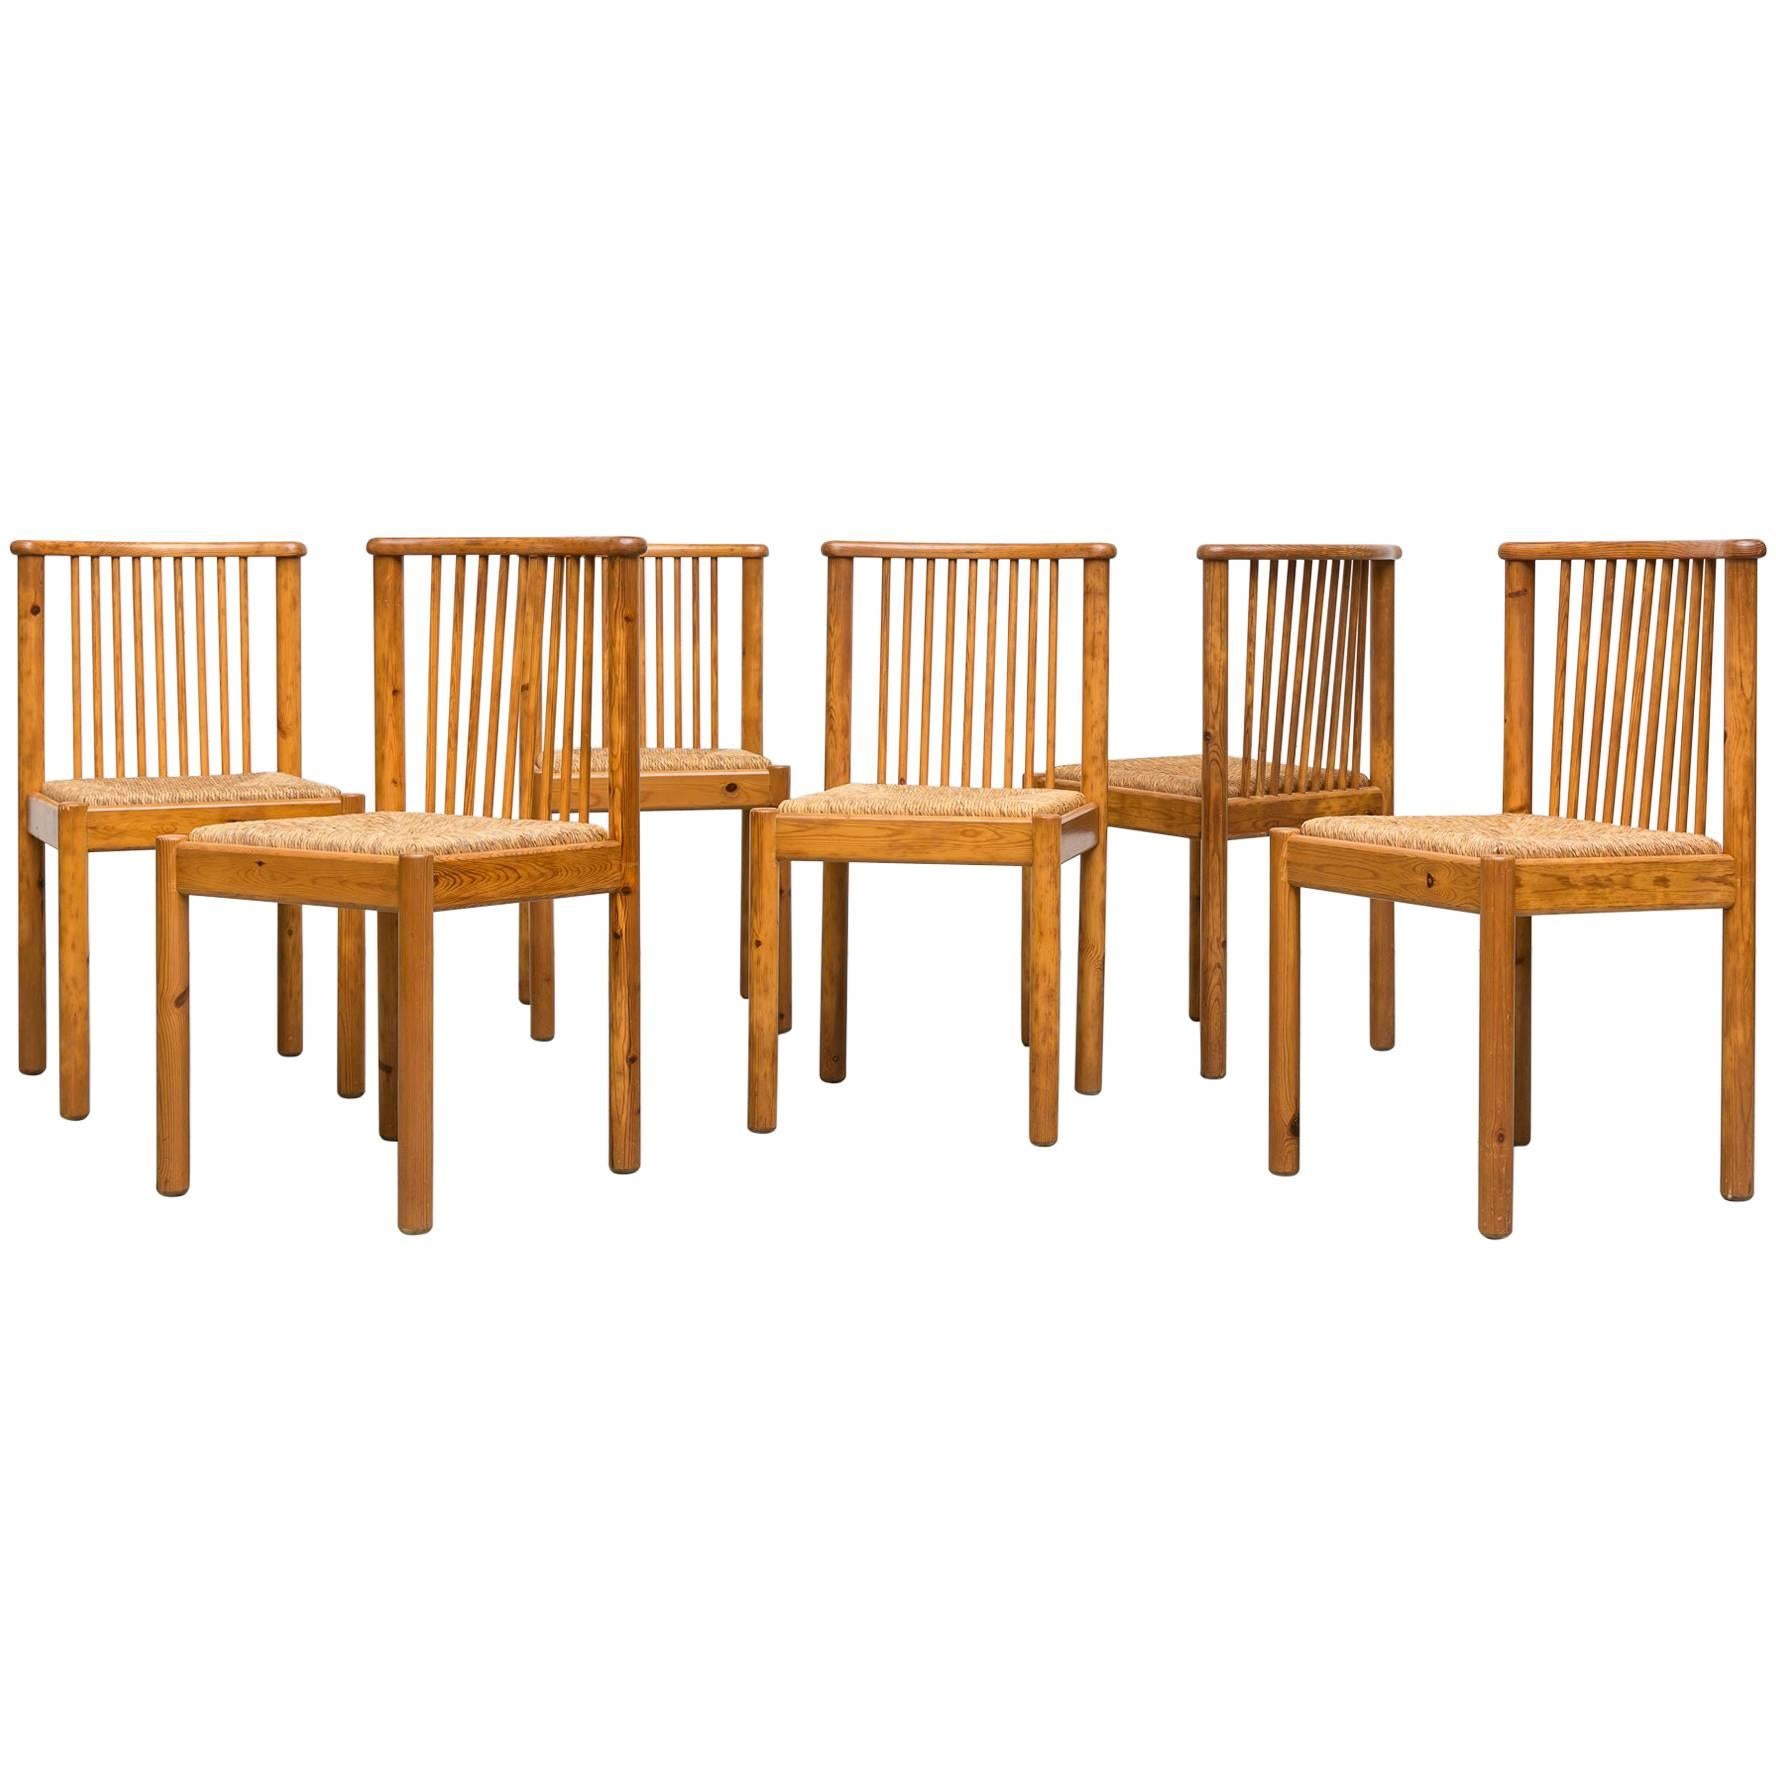 Set of 4 Mid-Century Pine Spindle Back and Rush Chairs